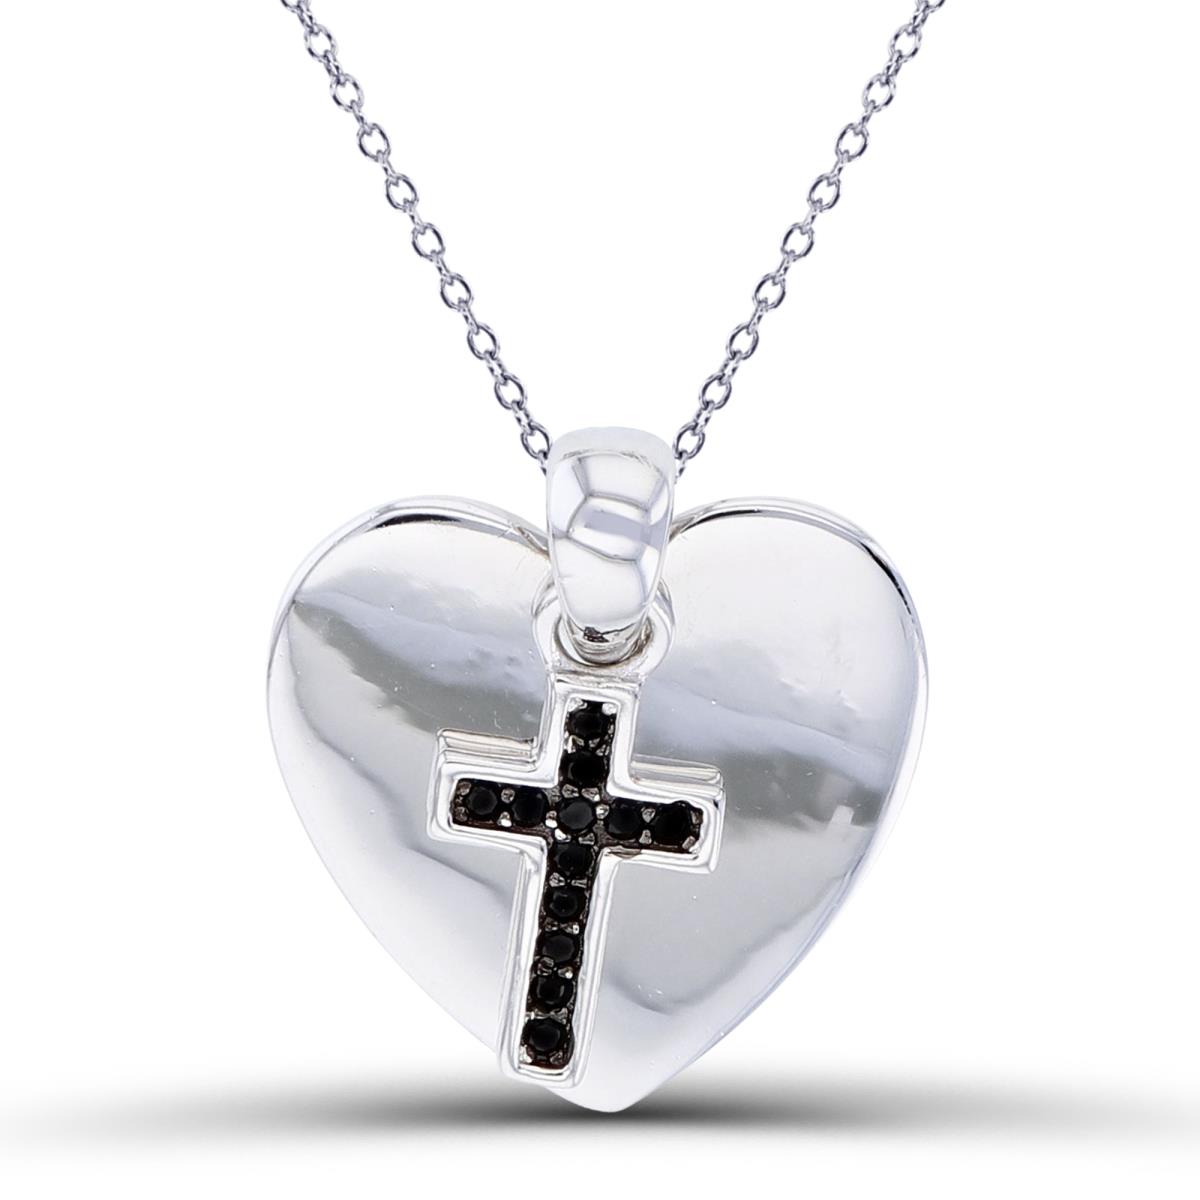 Sterling Silver Two-Tone Rnd Black Spinel Cross & High Polish Heart 18"Necklace